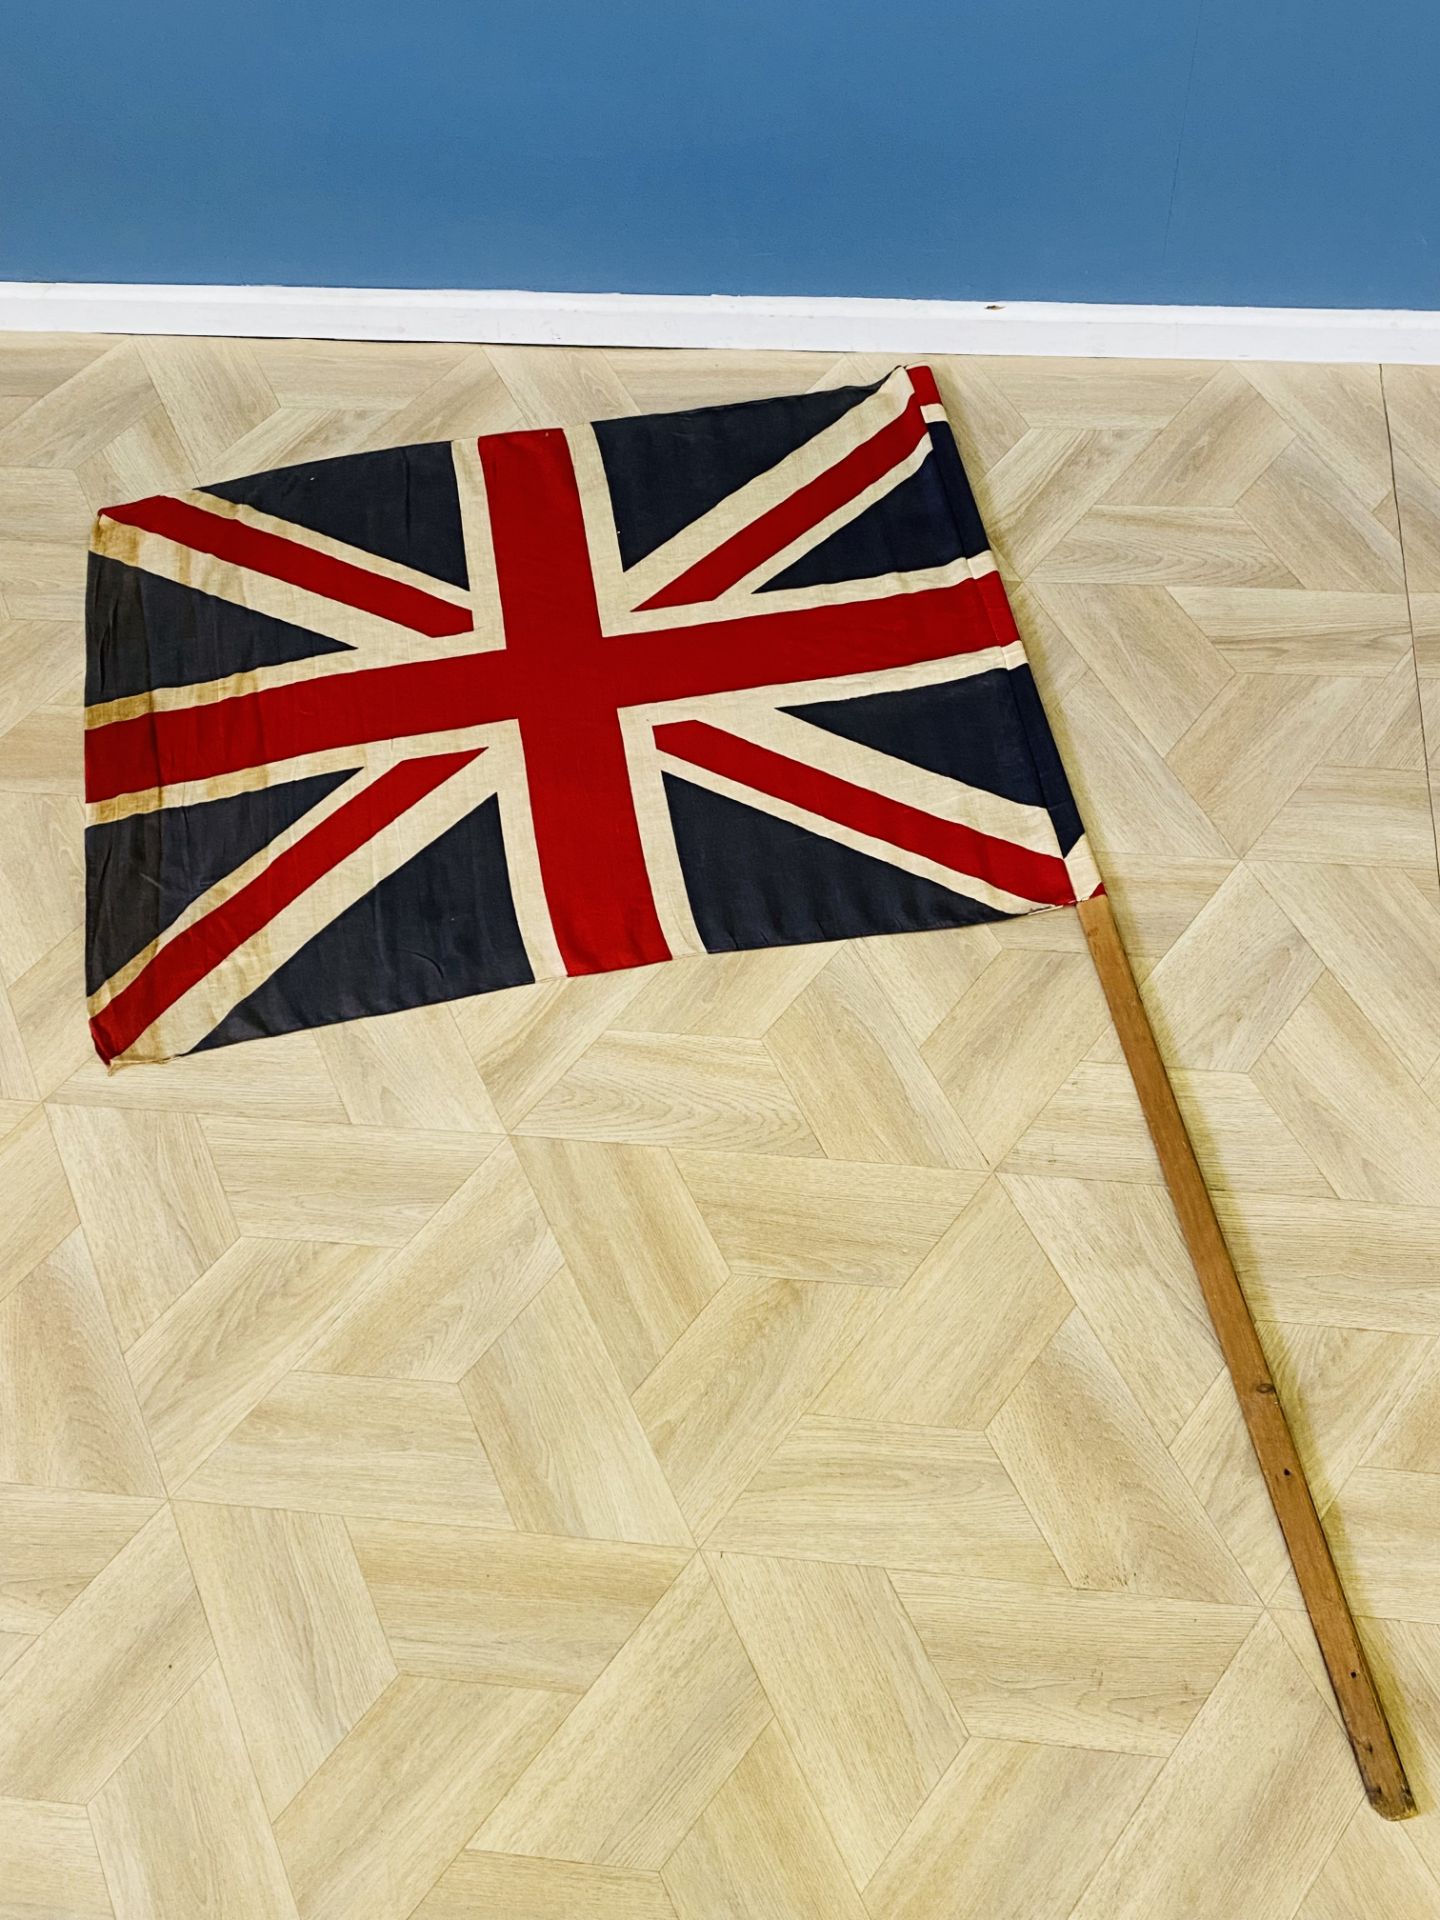 Four Union Jack flags on poles - Image 2 of 5